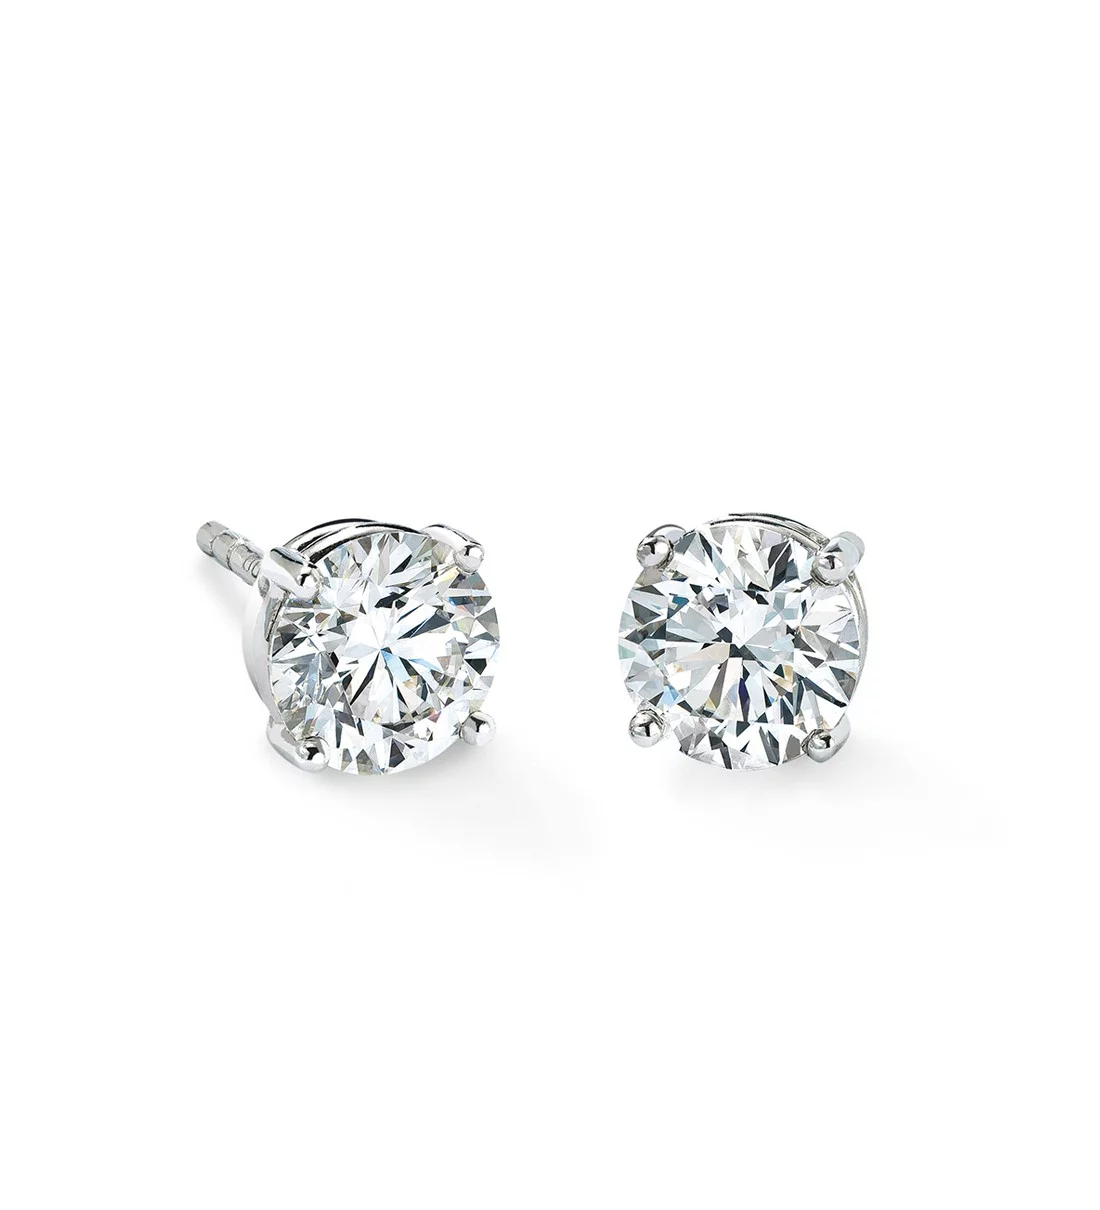 Paris Jewelry 14k White Gold 1/2 Carat Round 4 Prong Solitaire Created Diamond Stud Earrings